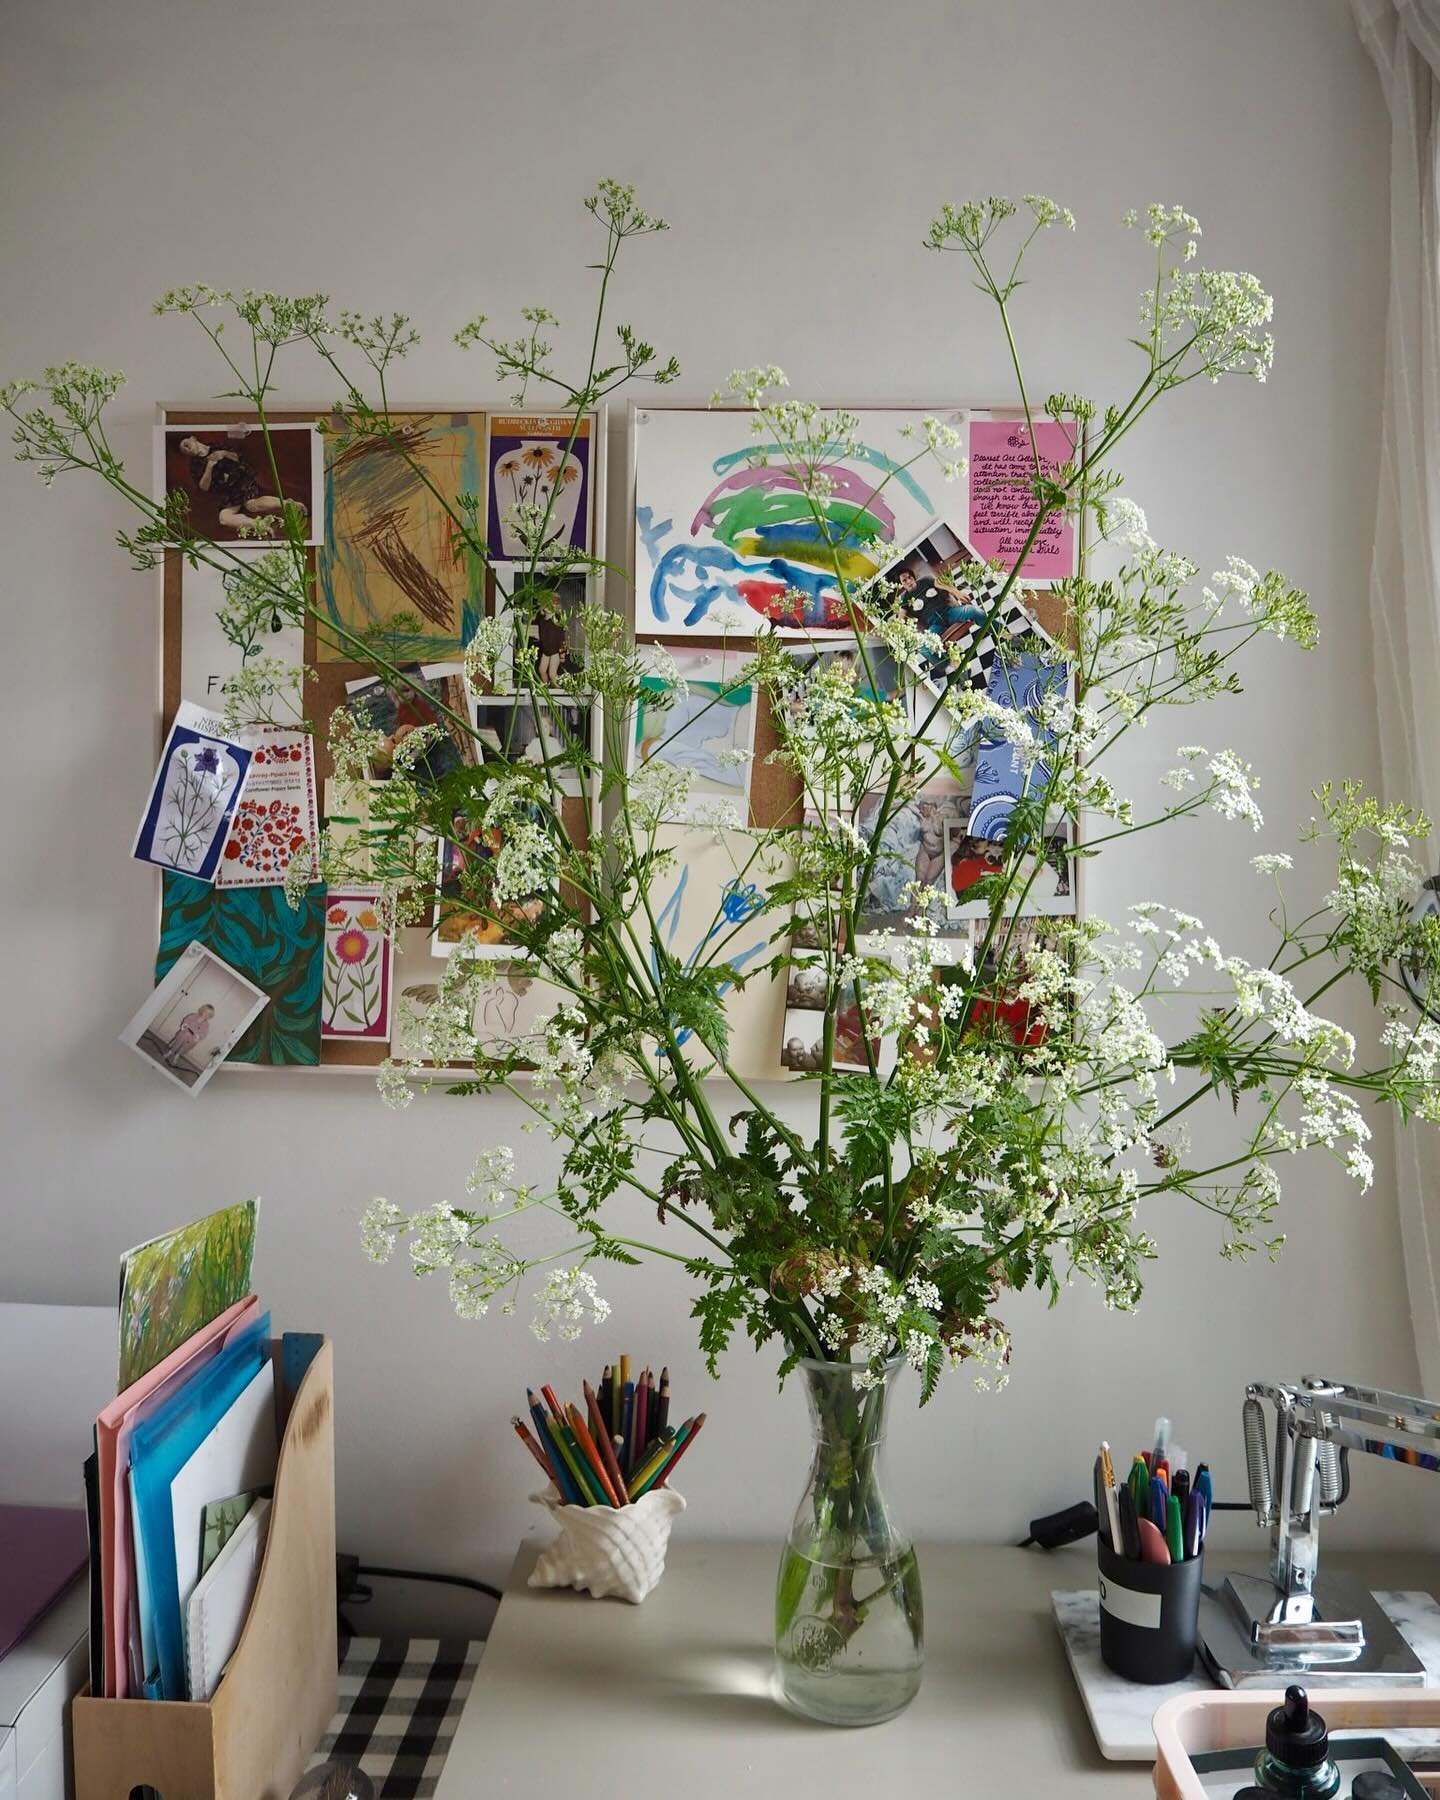 The anatomy of a room: It has taken a few years to get this space into anything that reassembles a creative space. The room used to be my bedroom. Then it was a lodgers and now it is my studio. I had a studio visit booked in for today and it gave me 